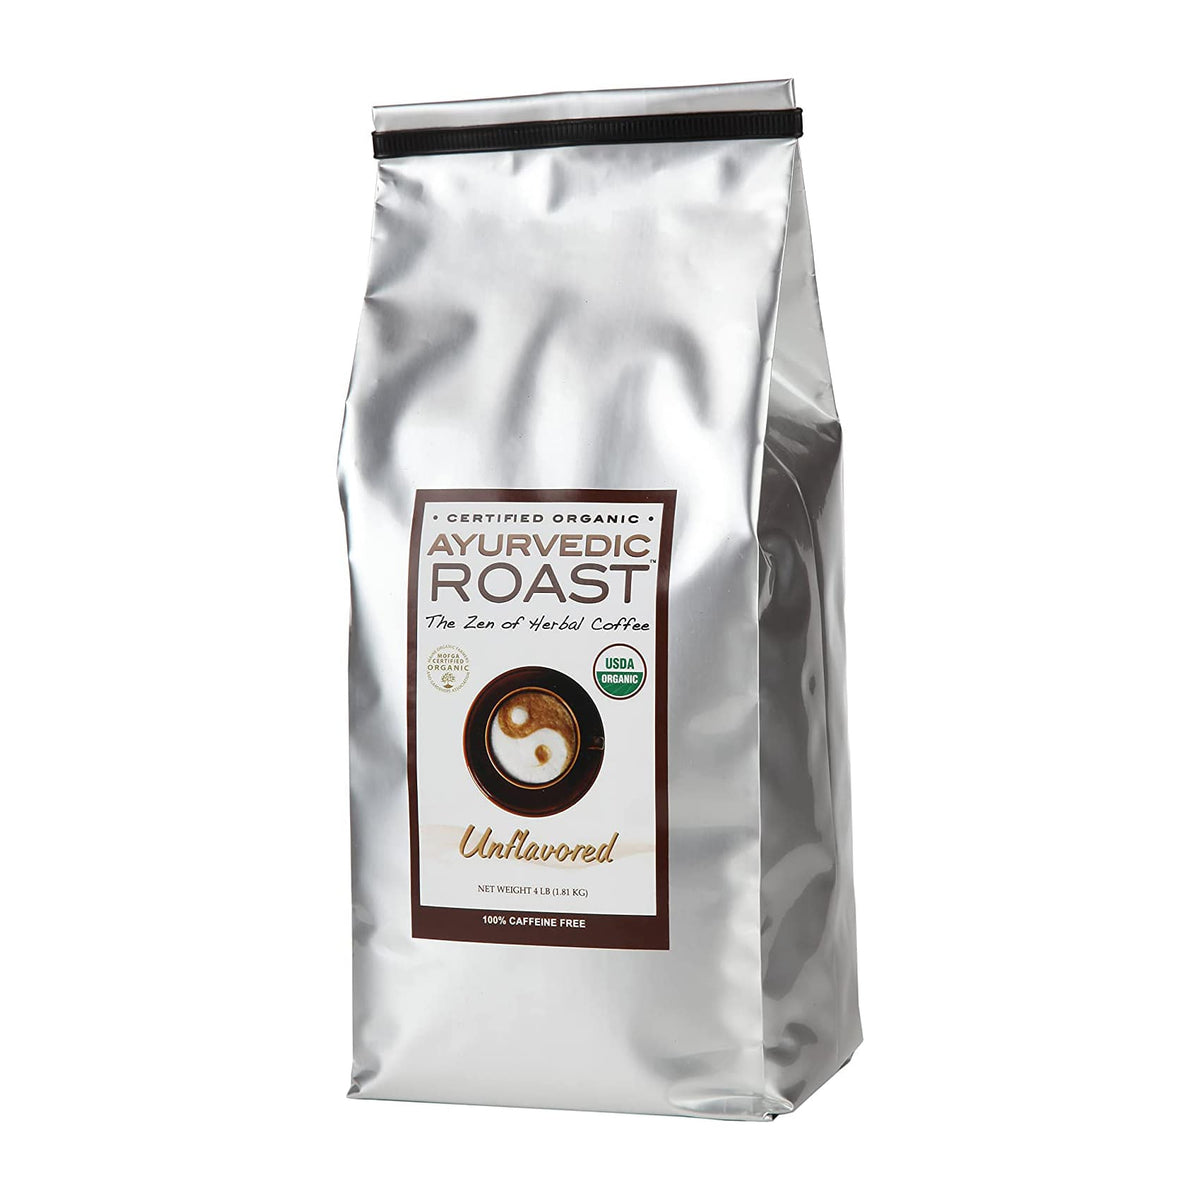 Ayurvedic Roast - Unflavored Caffeine Free Certified Organic Coffee Substitute - Only Tasty Goods Inc.